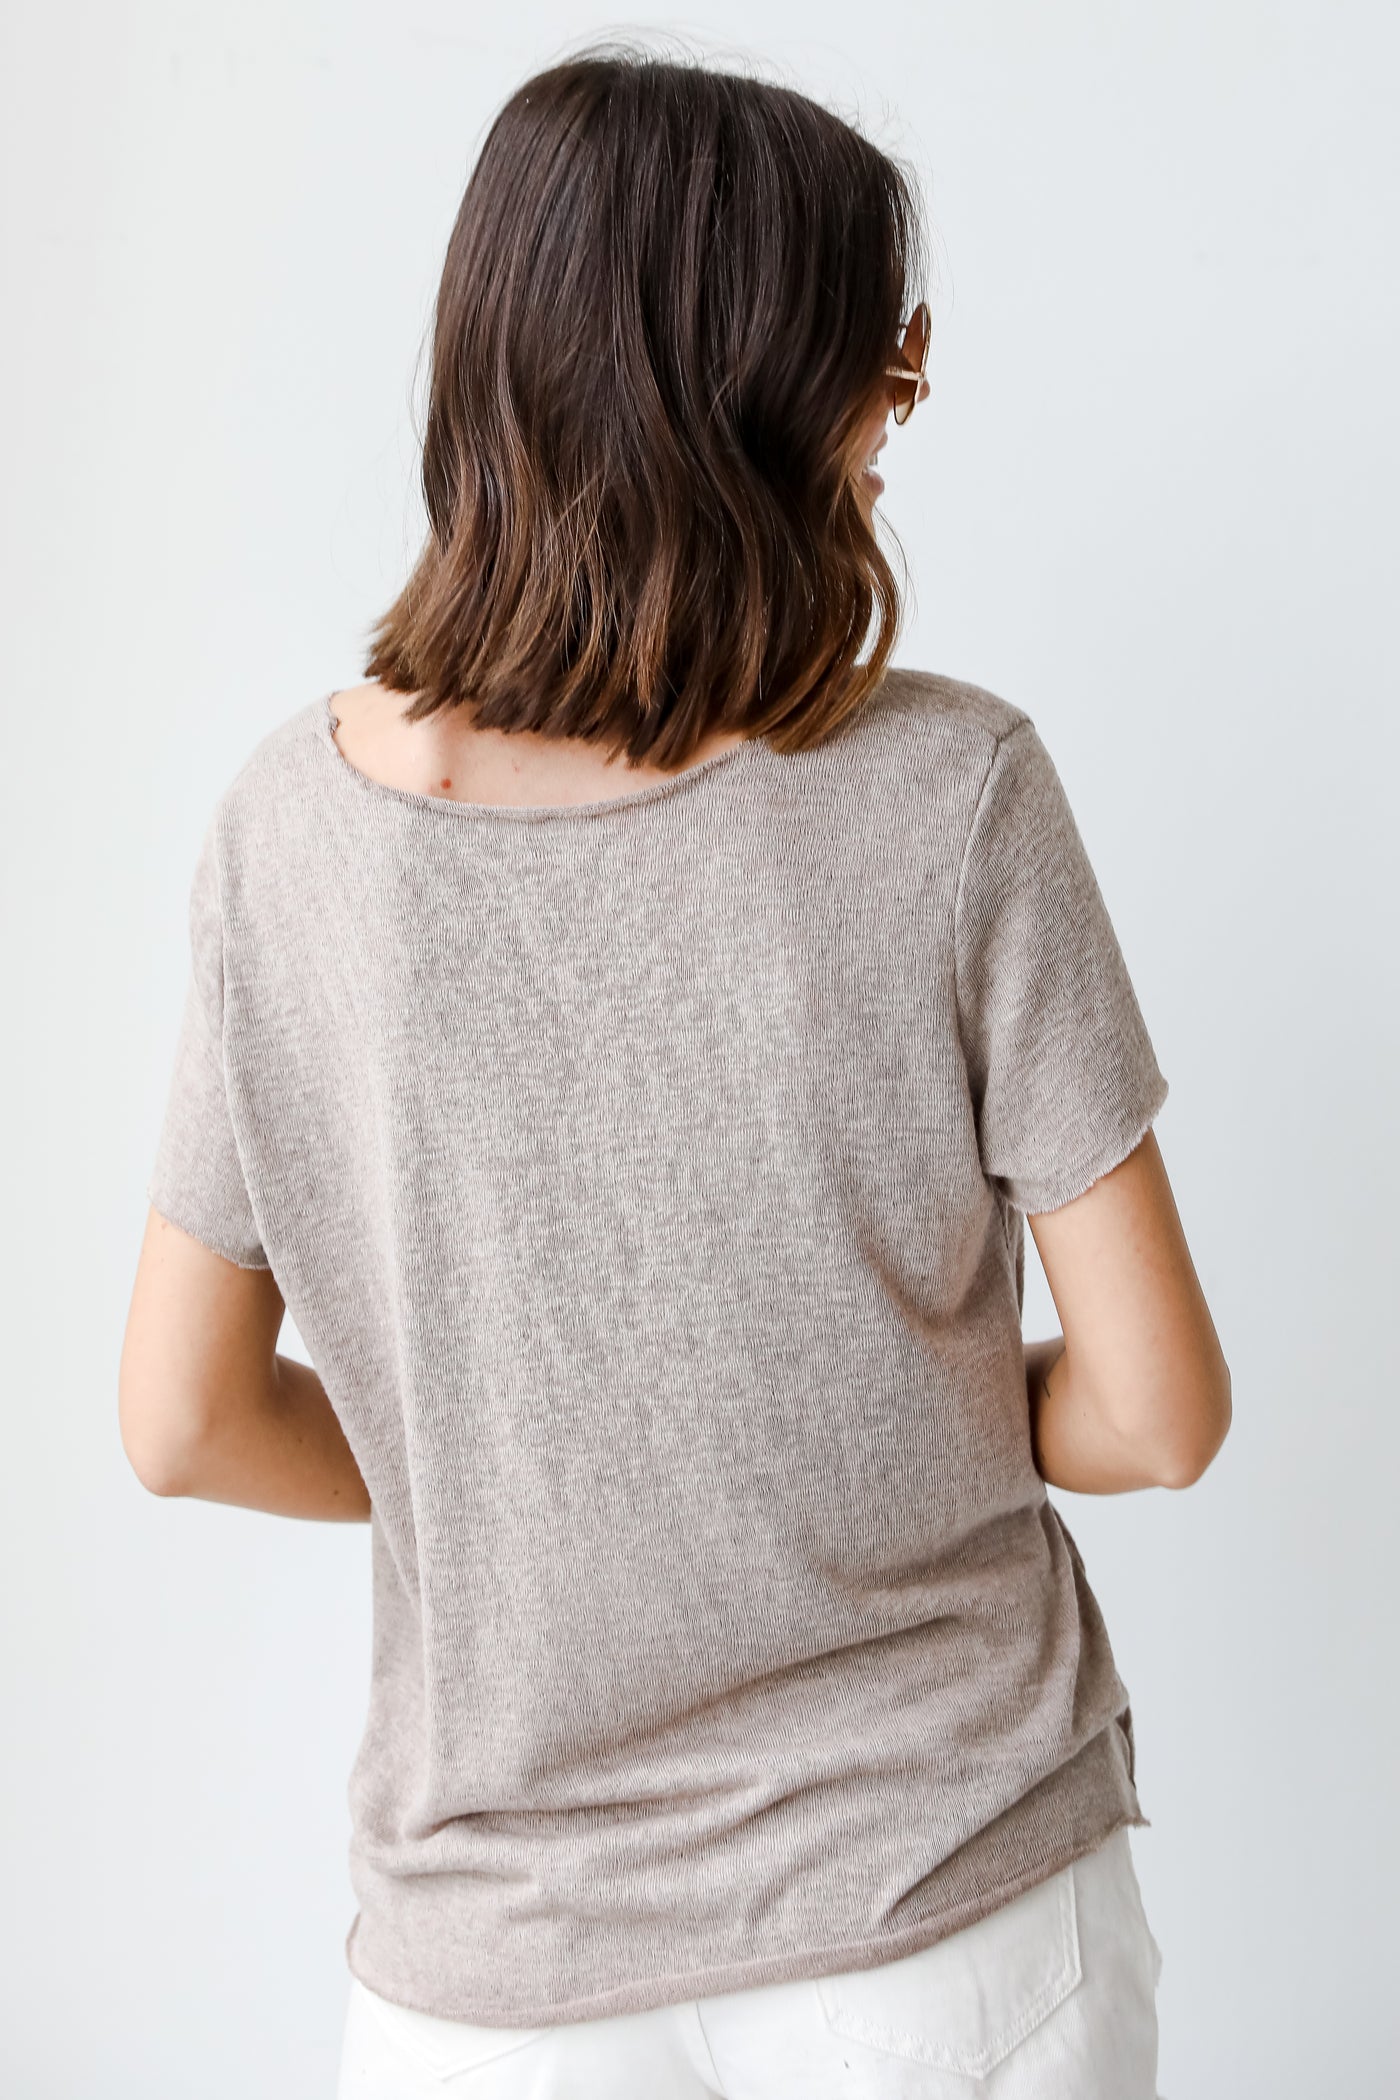 Knit V-Neck Tee in taupe back view